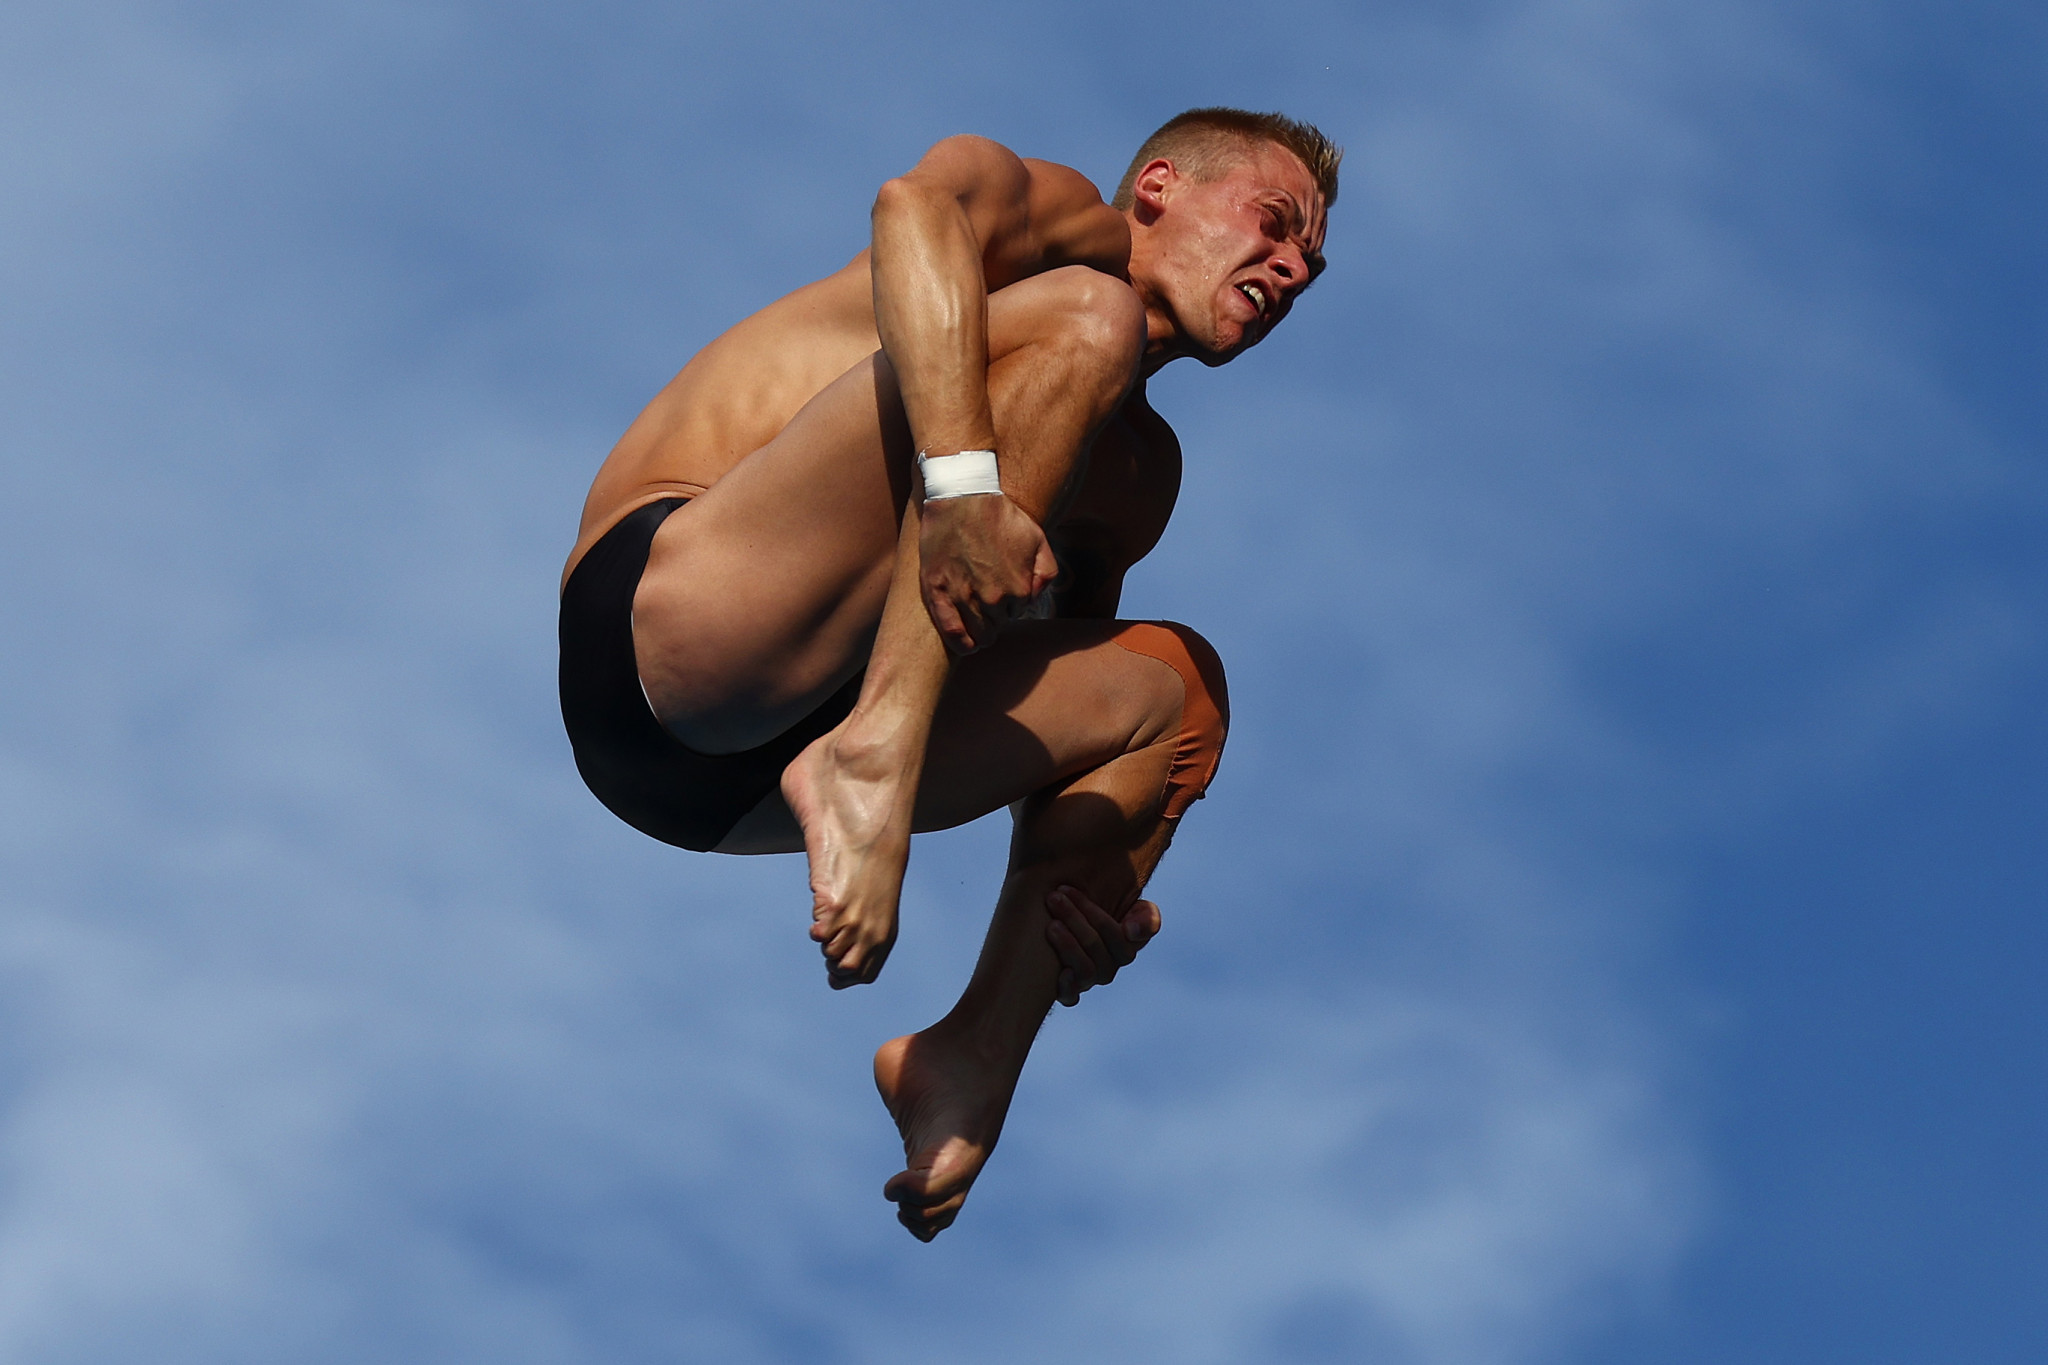 Germany's Timo Barthel is due to compete in four events at the season-opening Diving World Cup in Berlin ©Getty Images